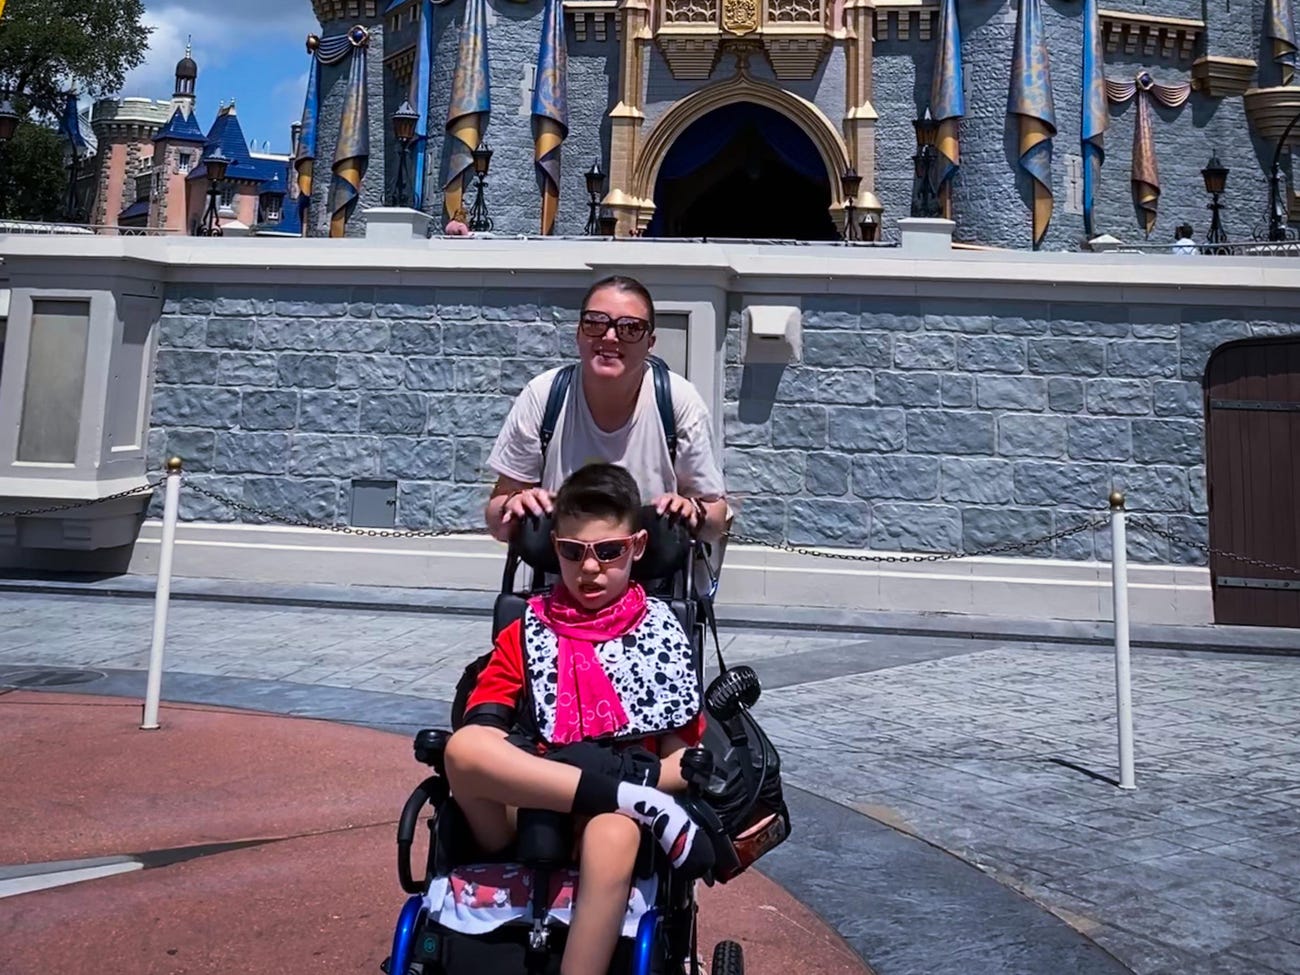 Tricia Proefrock took her son to Walt Disney World and got a rude note about how she parked to best accommodate his needs